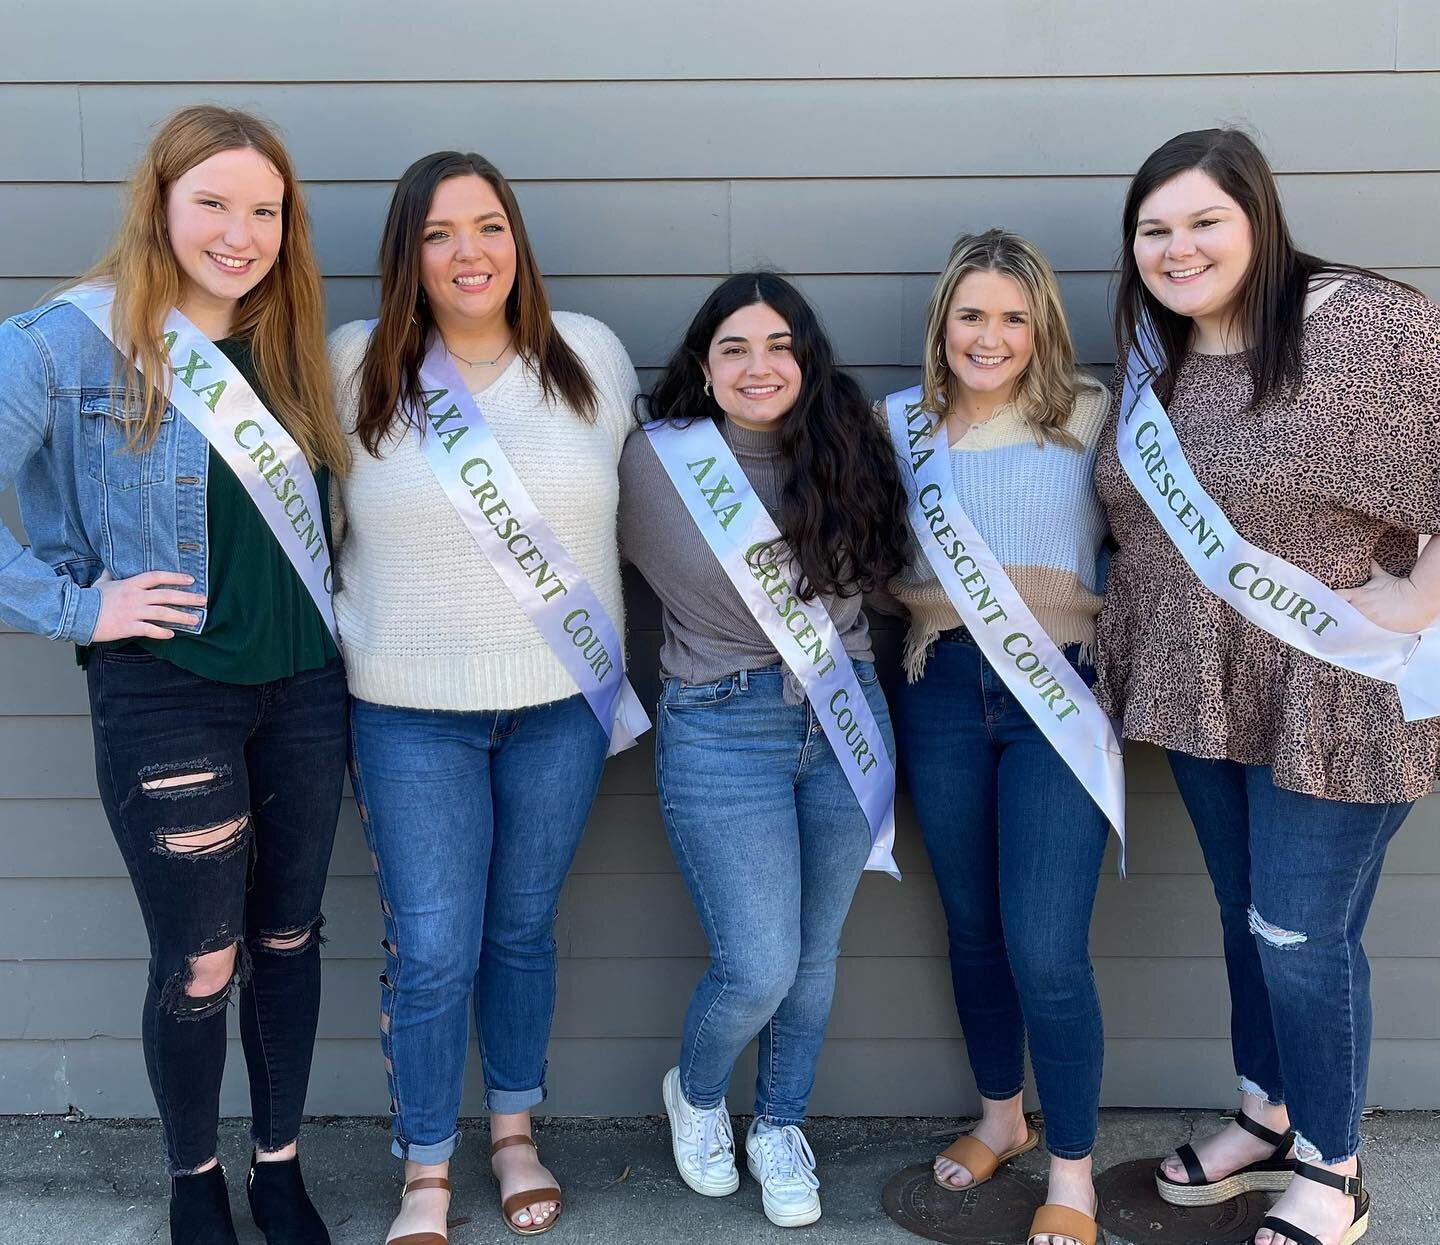 The brothers of Lambda Chi Alpha would like to congratulate these lovely ladies on making our Crescent Court! We appreciate their support, and we thank them for all they have done for us this past year. #RushLambdaChi #ZAX